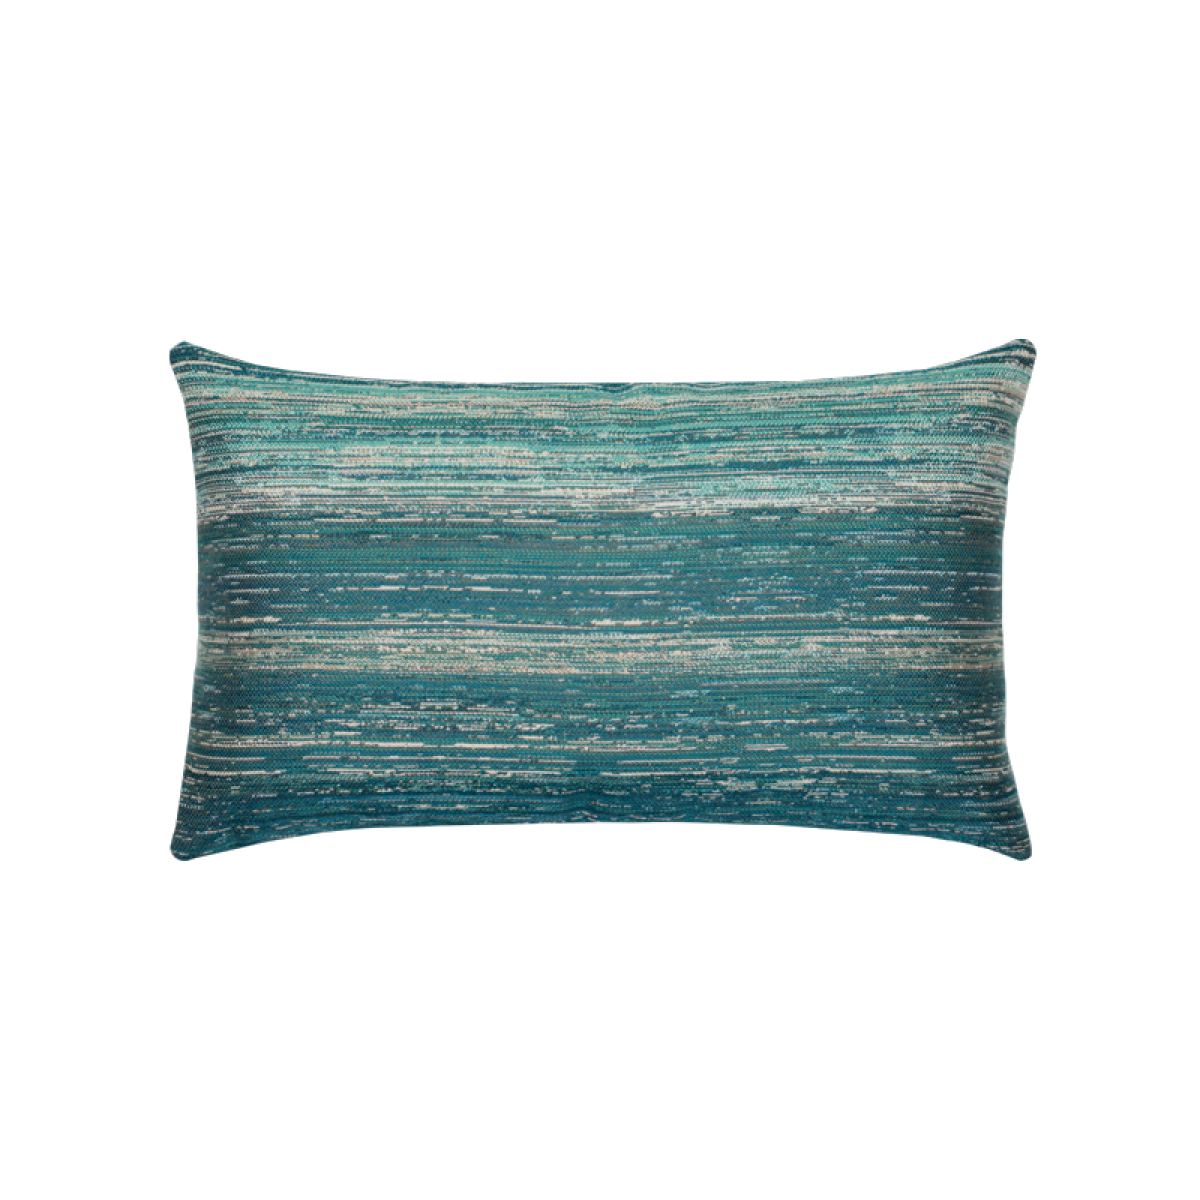 Textured Lagoon Lumbar - This item will ship by 4/22